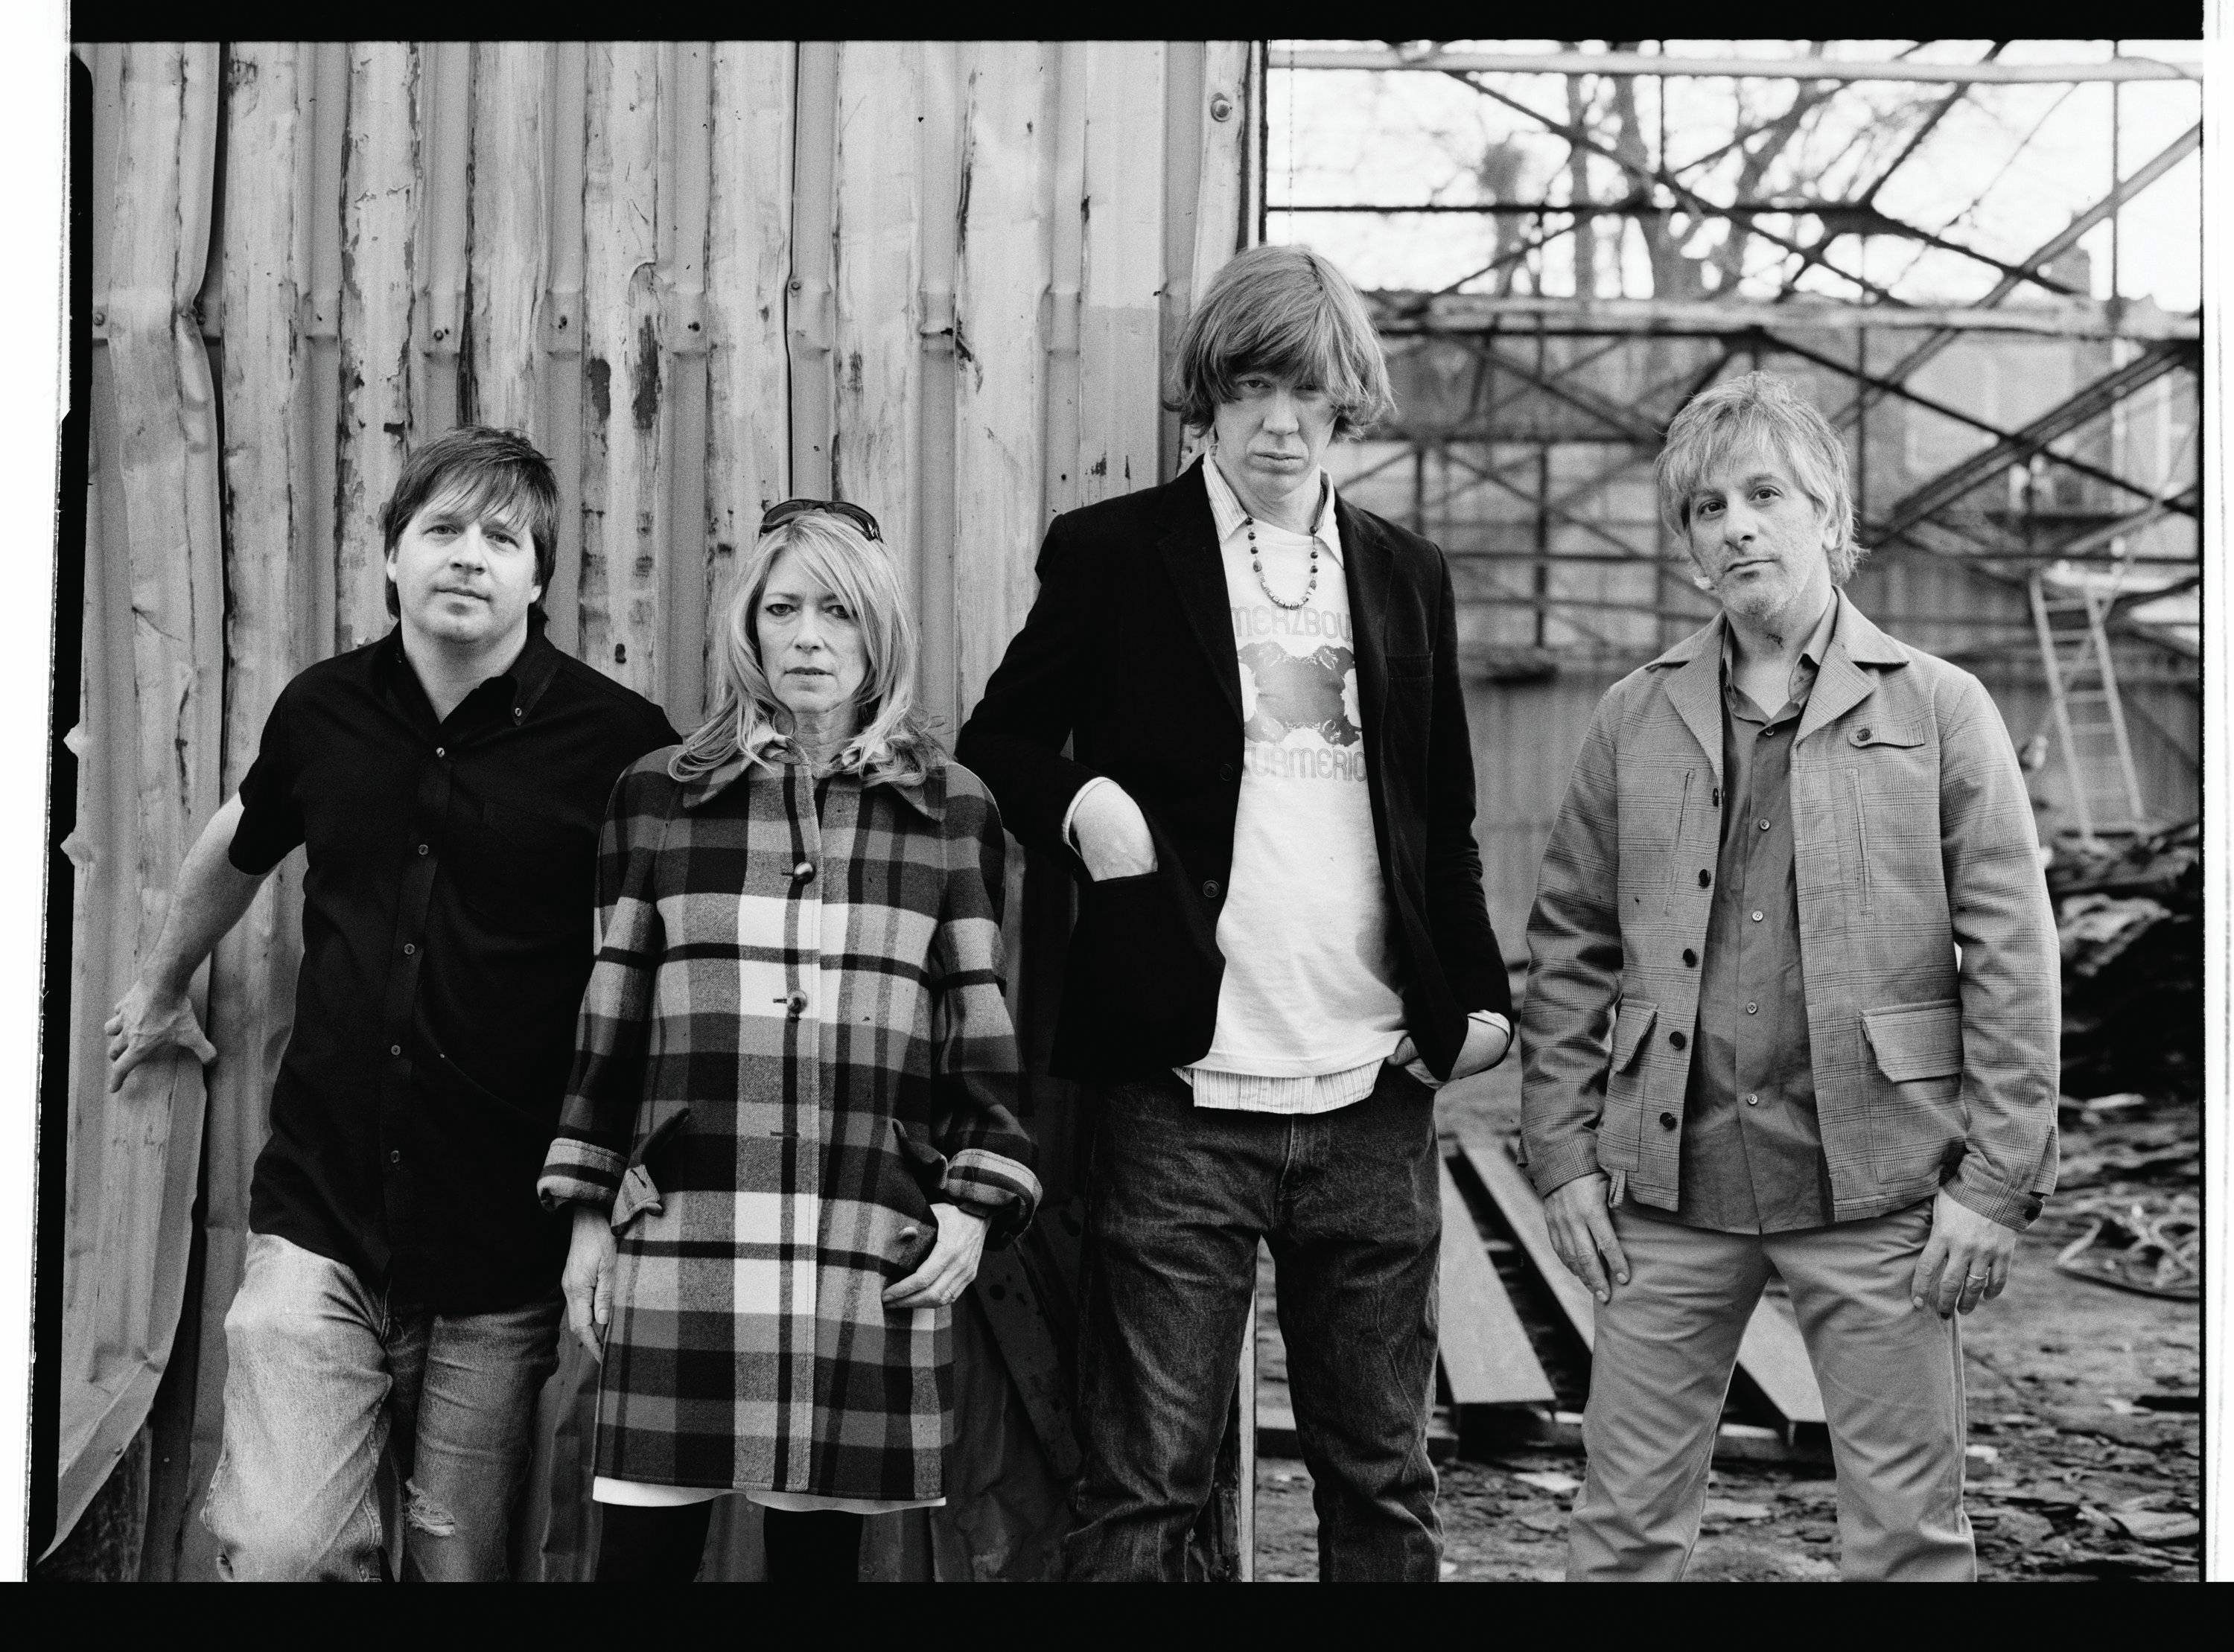 Sonic Youth Wallpaper